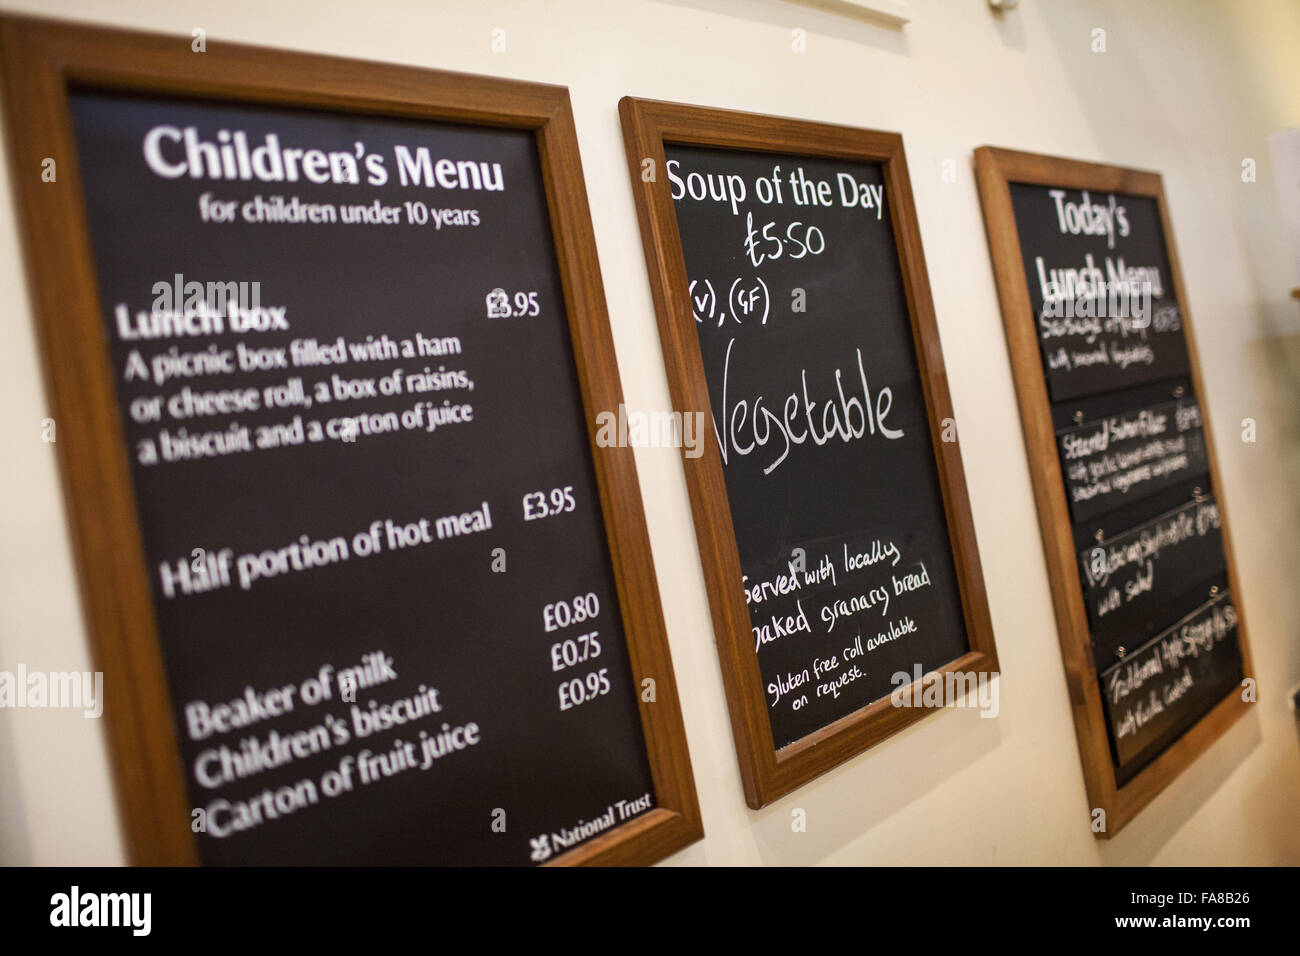 Menu boards at the Mote Restaurant at Ightham Mote, Kent. Ightham Mote is a medieval moated manor house near Sevenoaks. Stock Photo